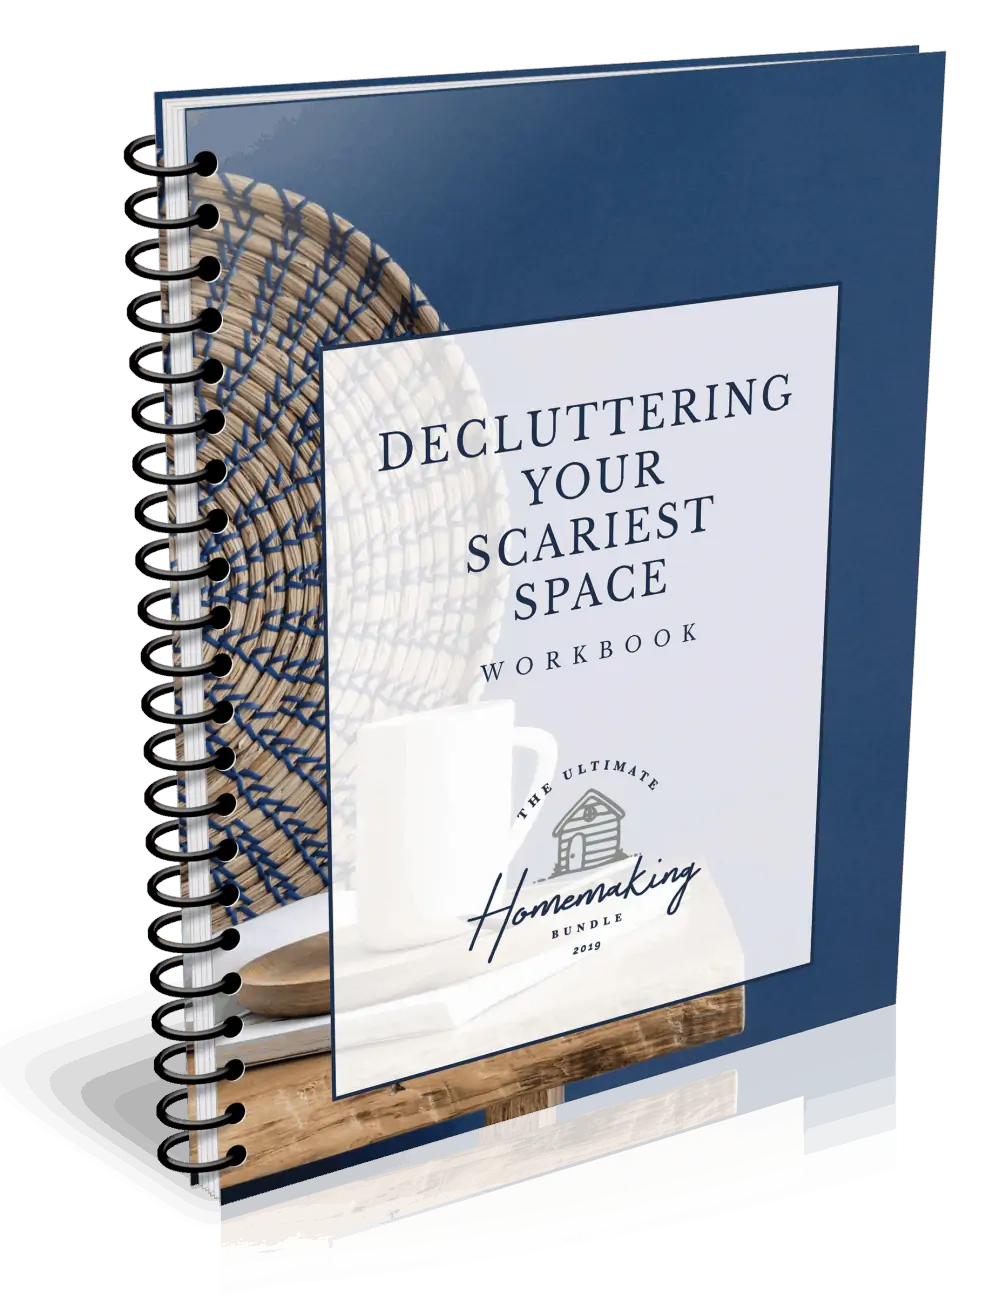 Decluttering your scariest space.